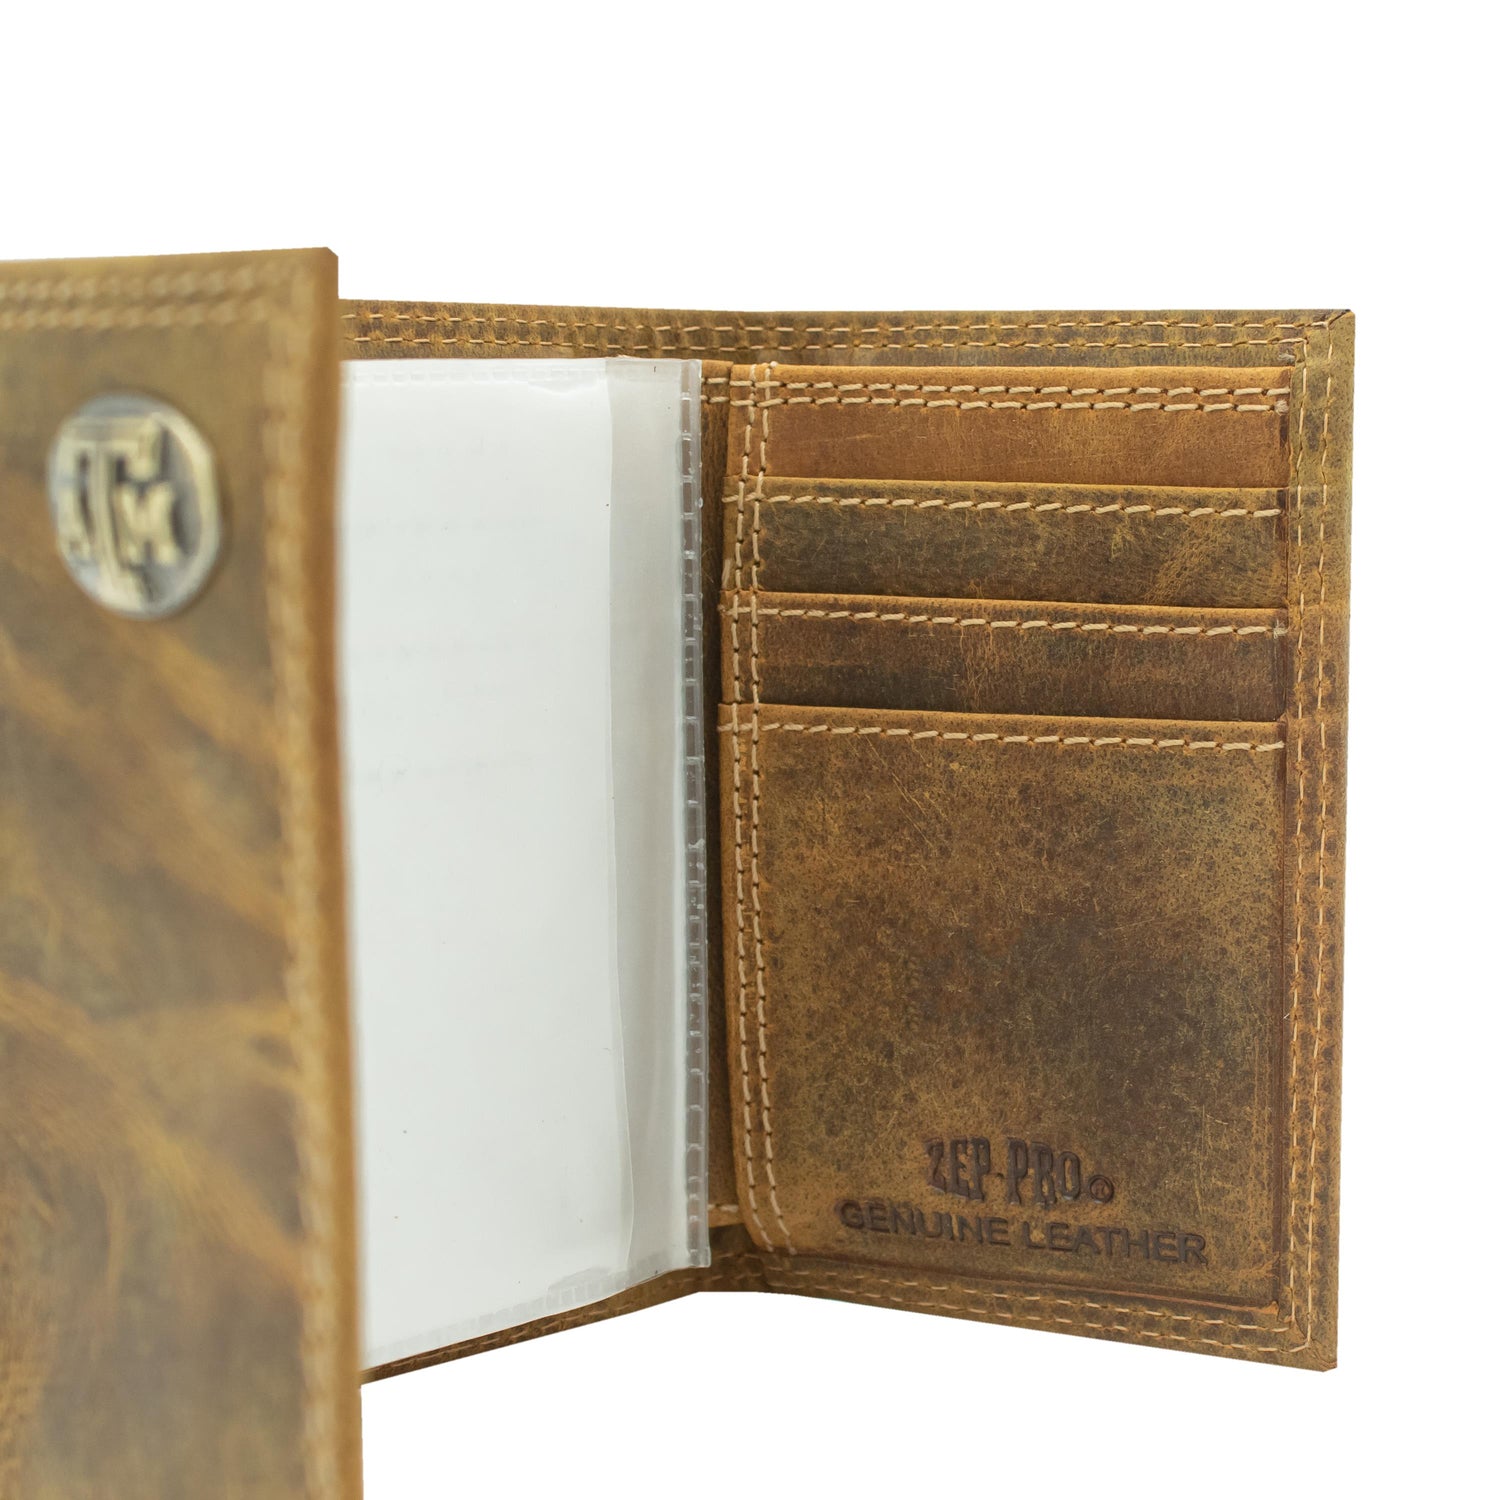 Texas A&M Trifold Conch Wallet